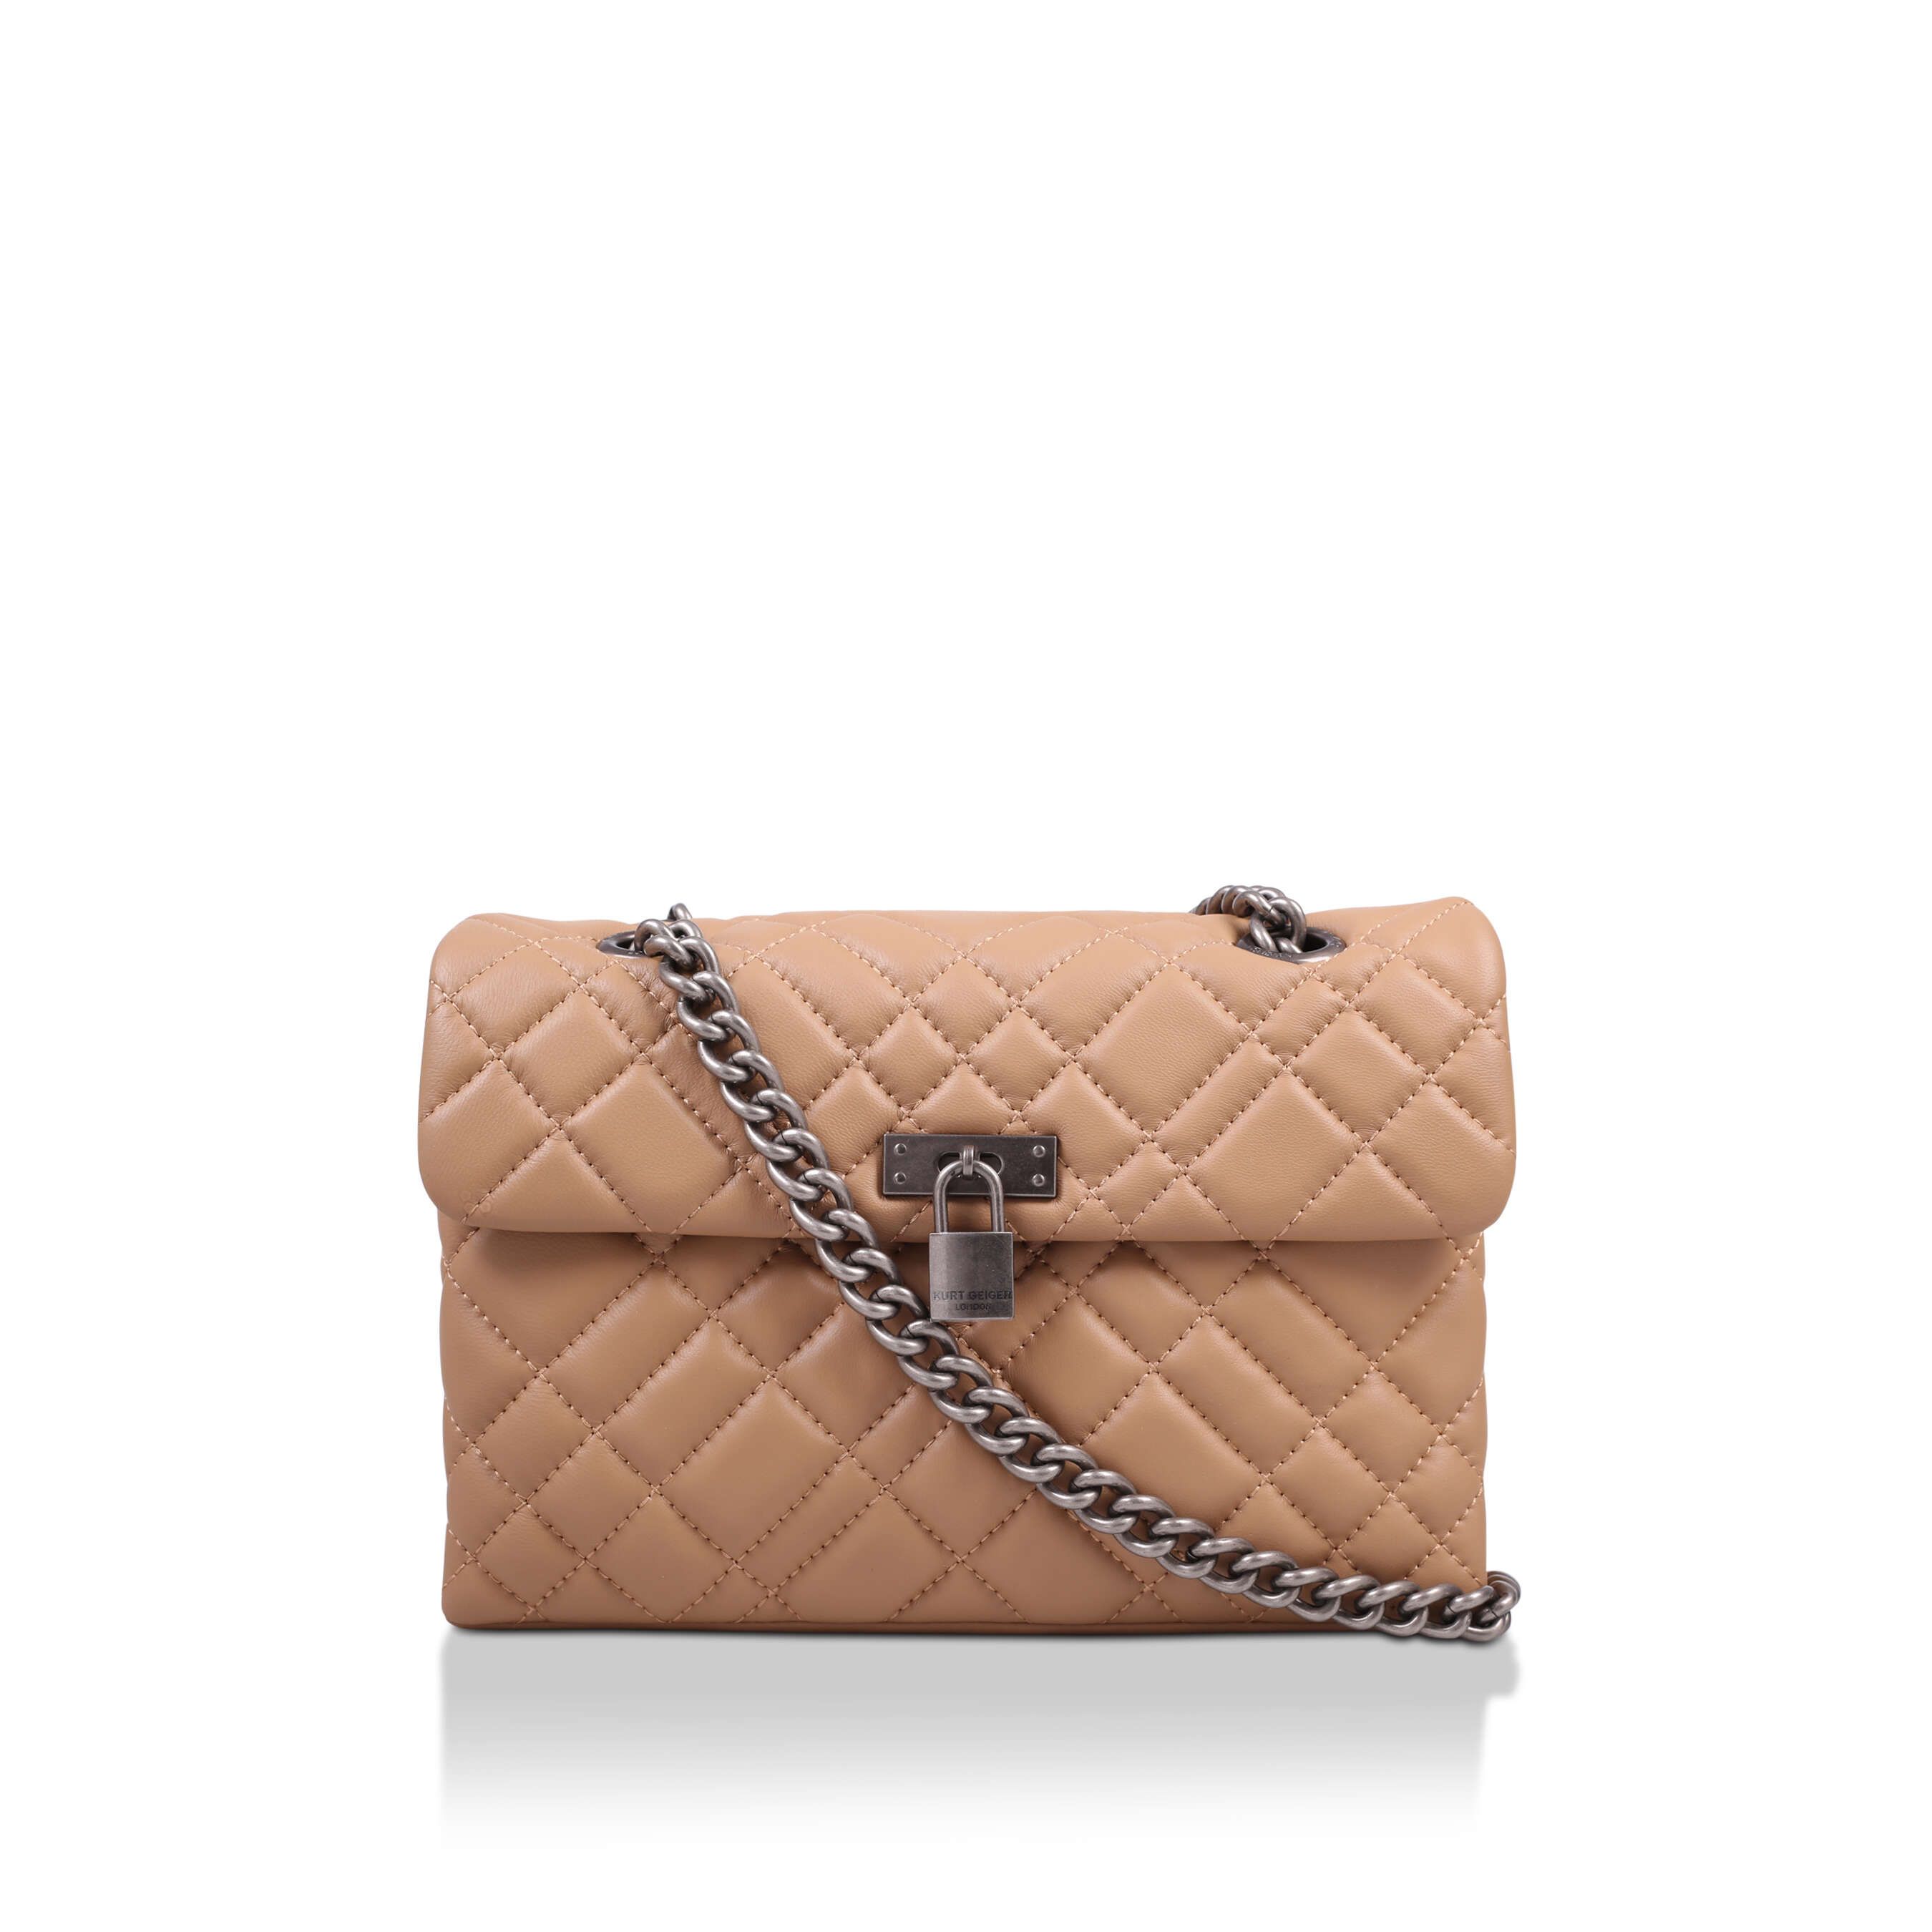 KGL Brixton Lock Bag is a leather quilted bag in camel, with the option of wearing on the shoulder or across the body.